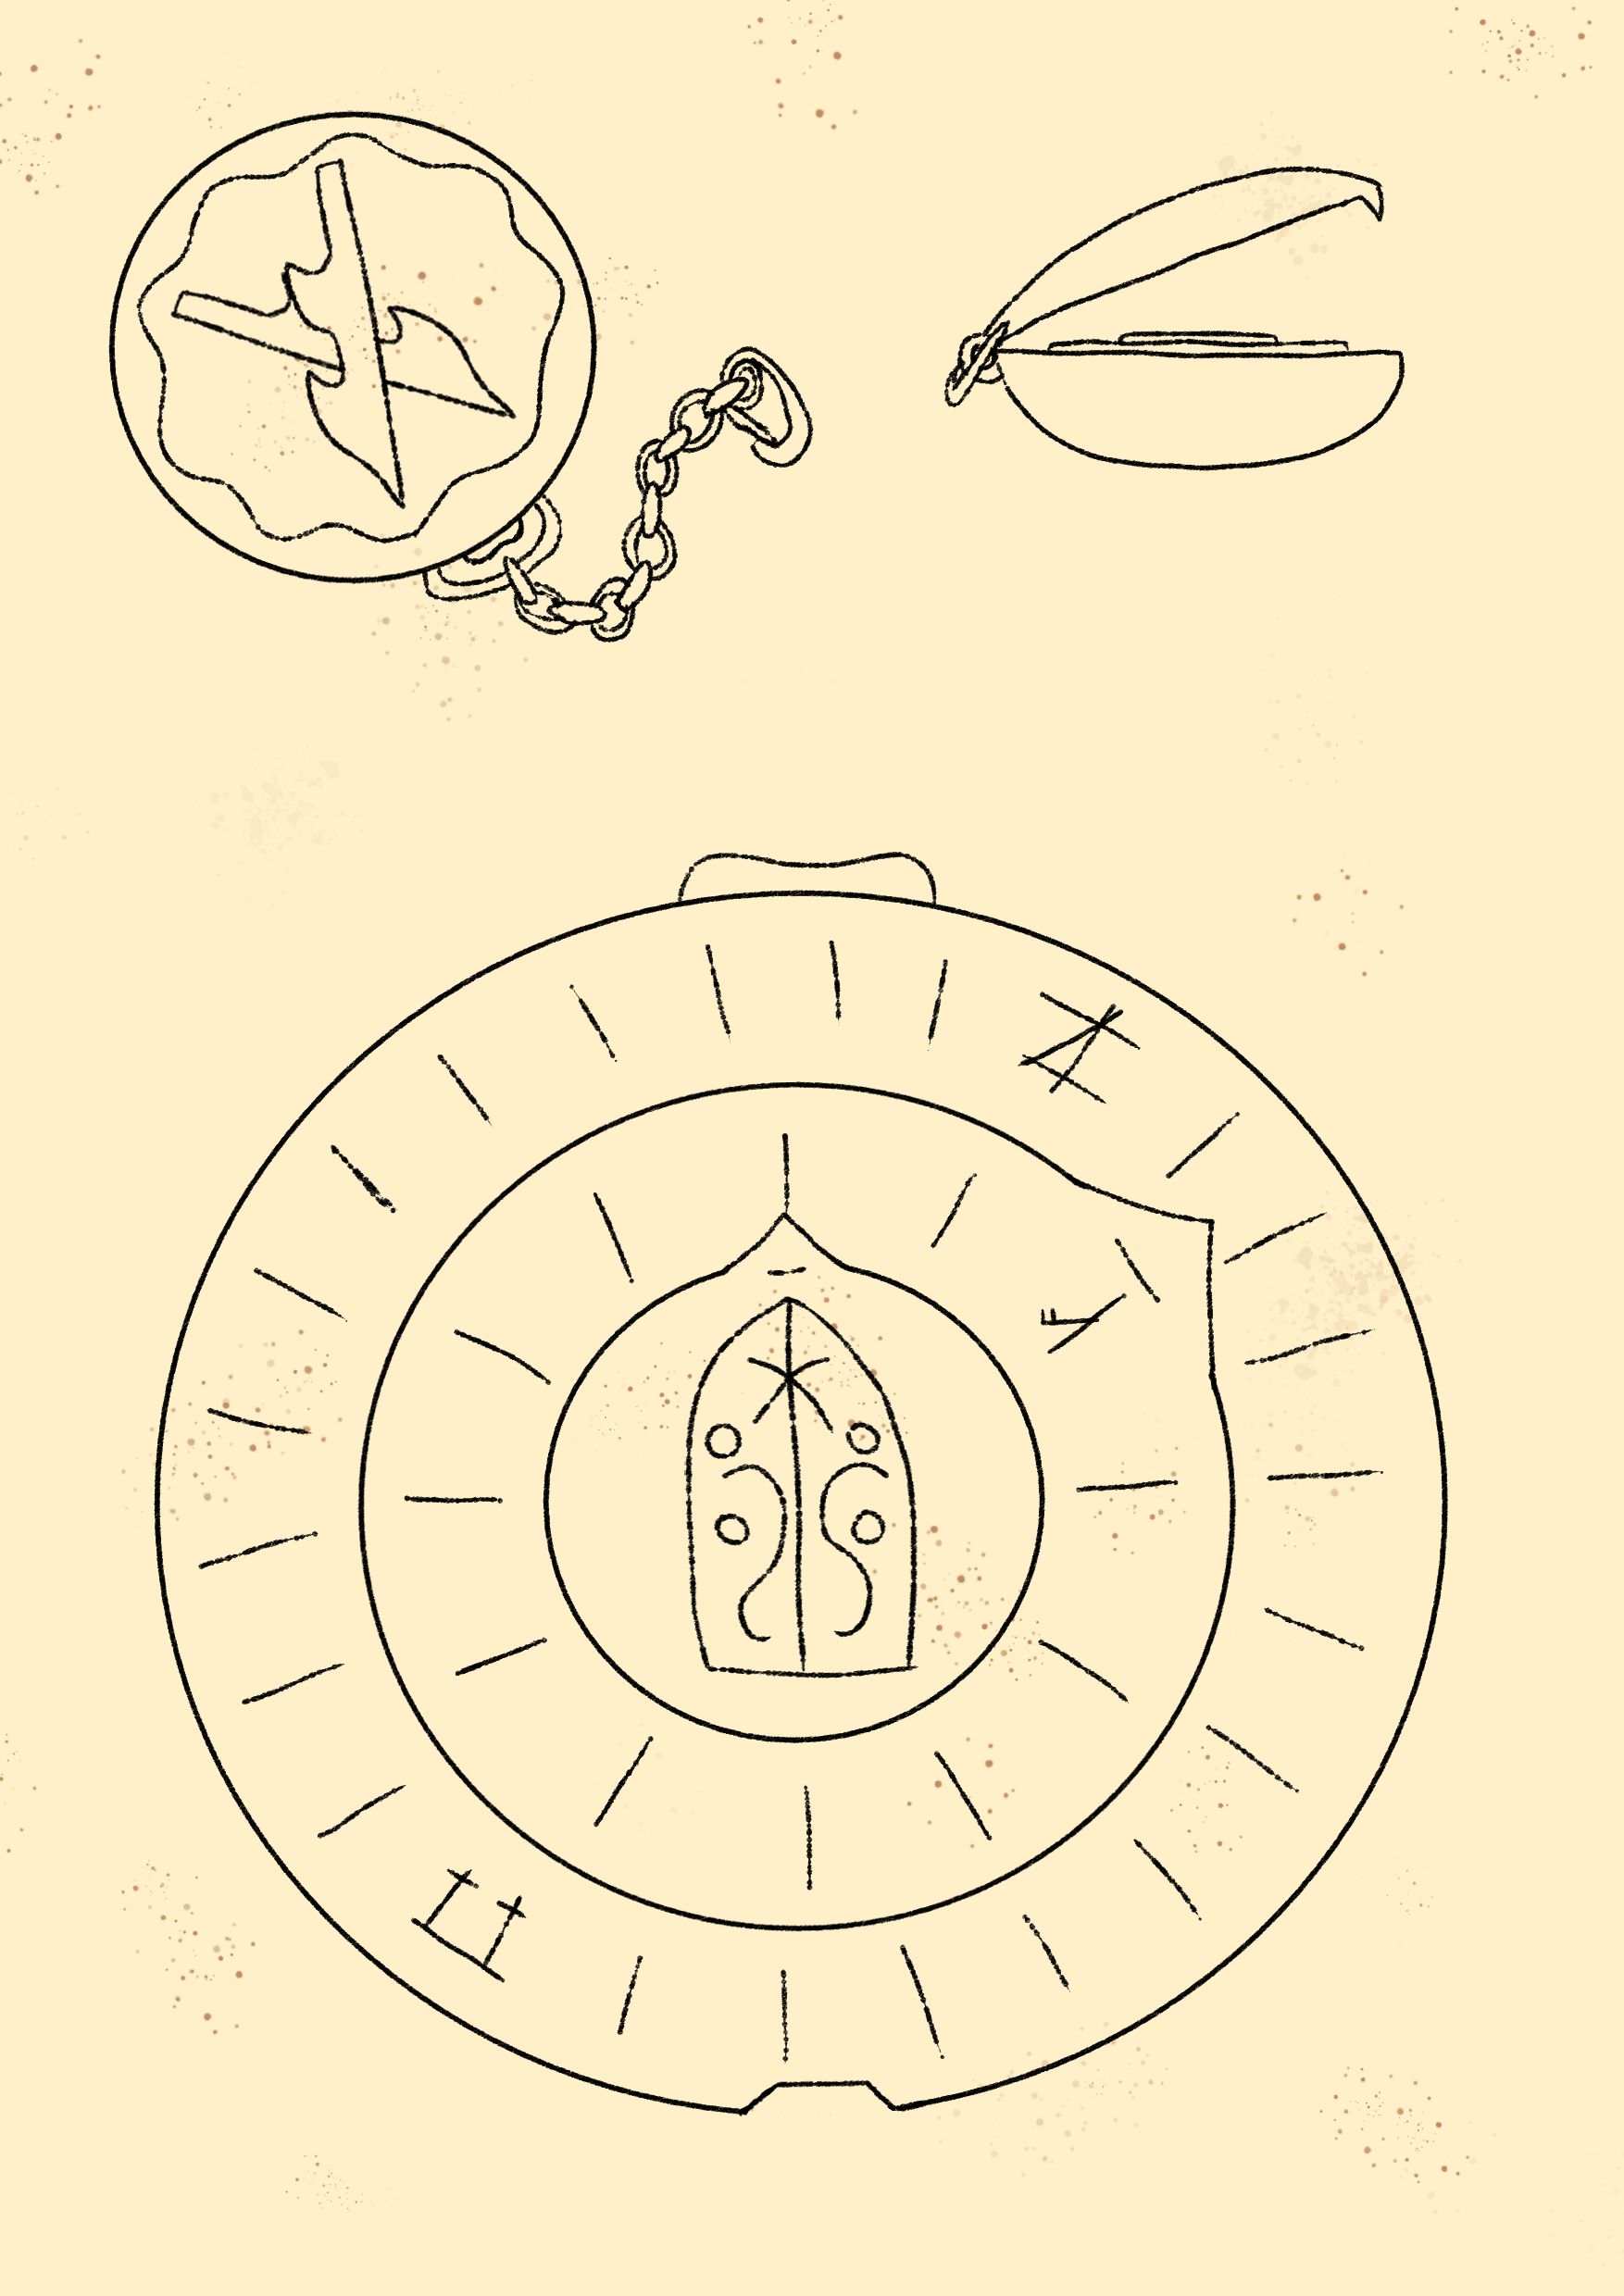 Ink sketches of the interior and exterior of a timekeeping device.